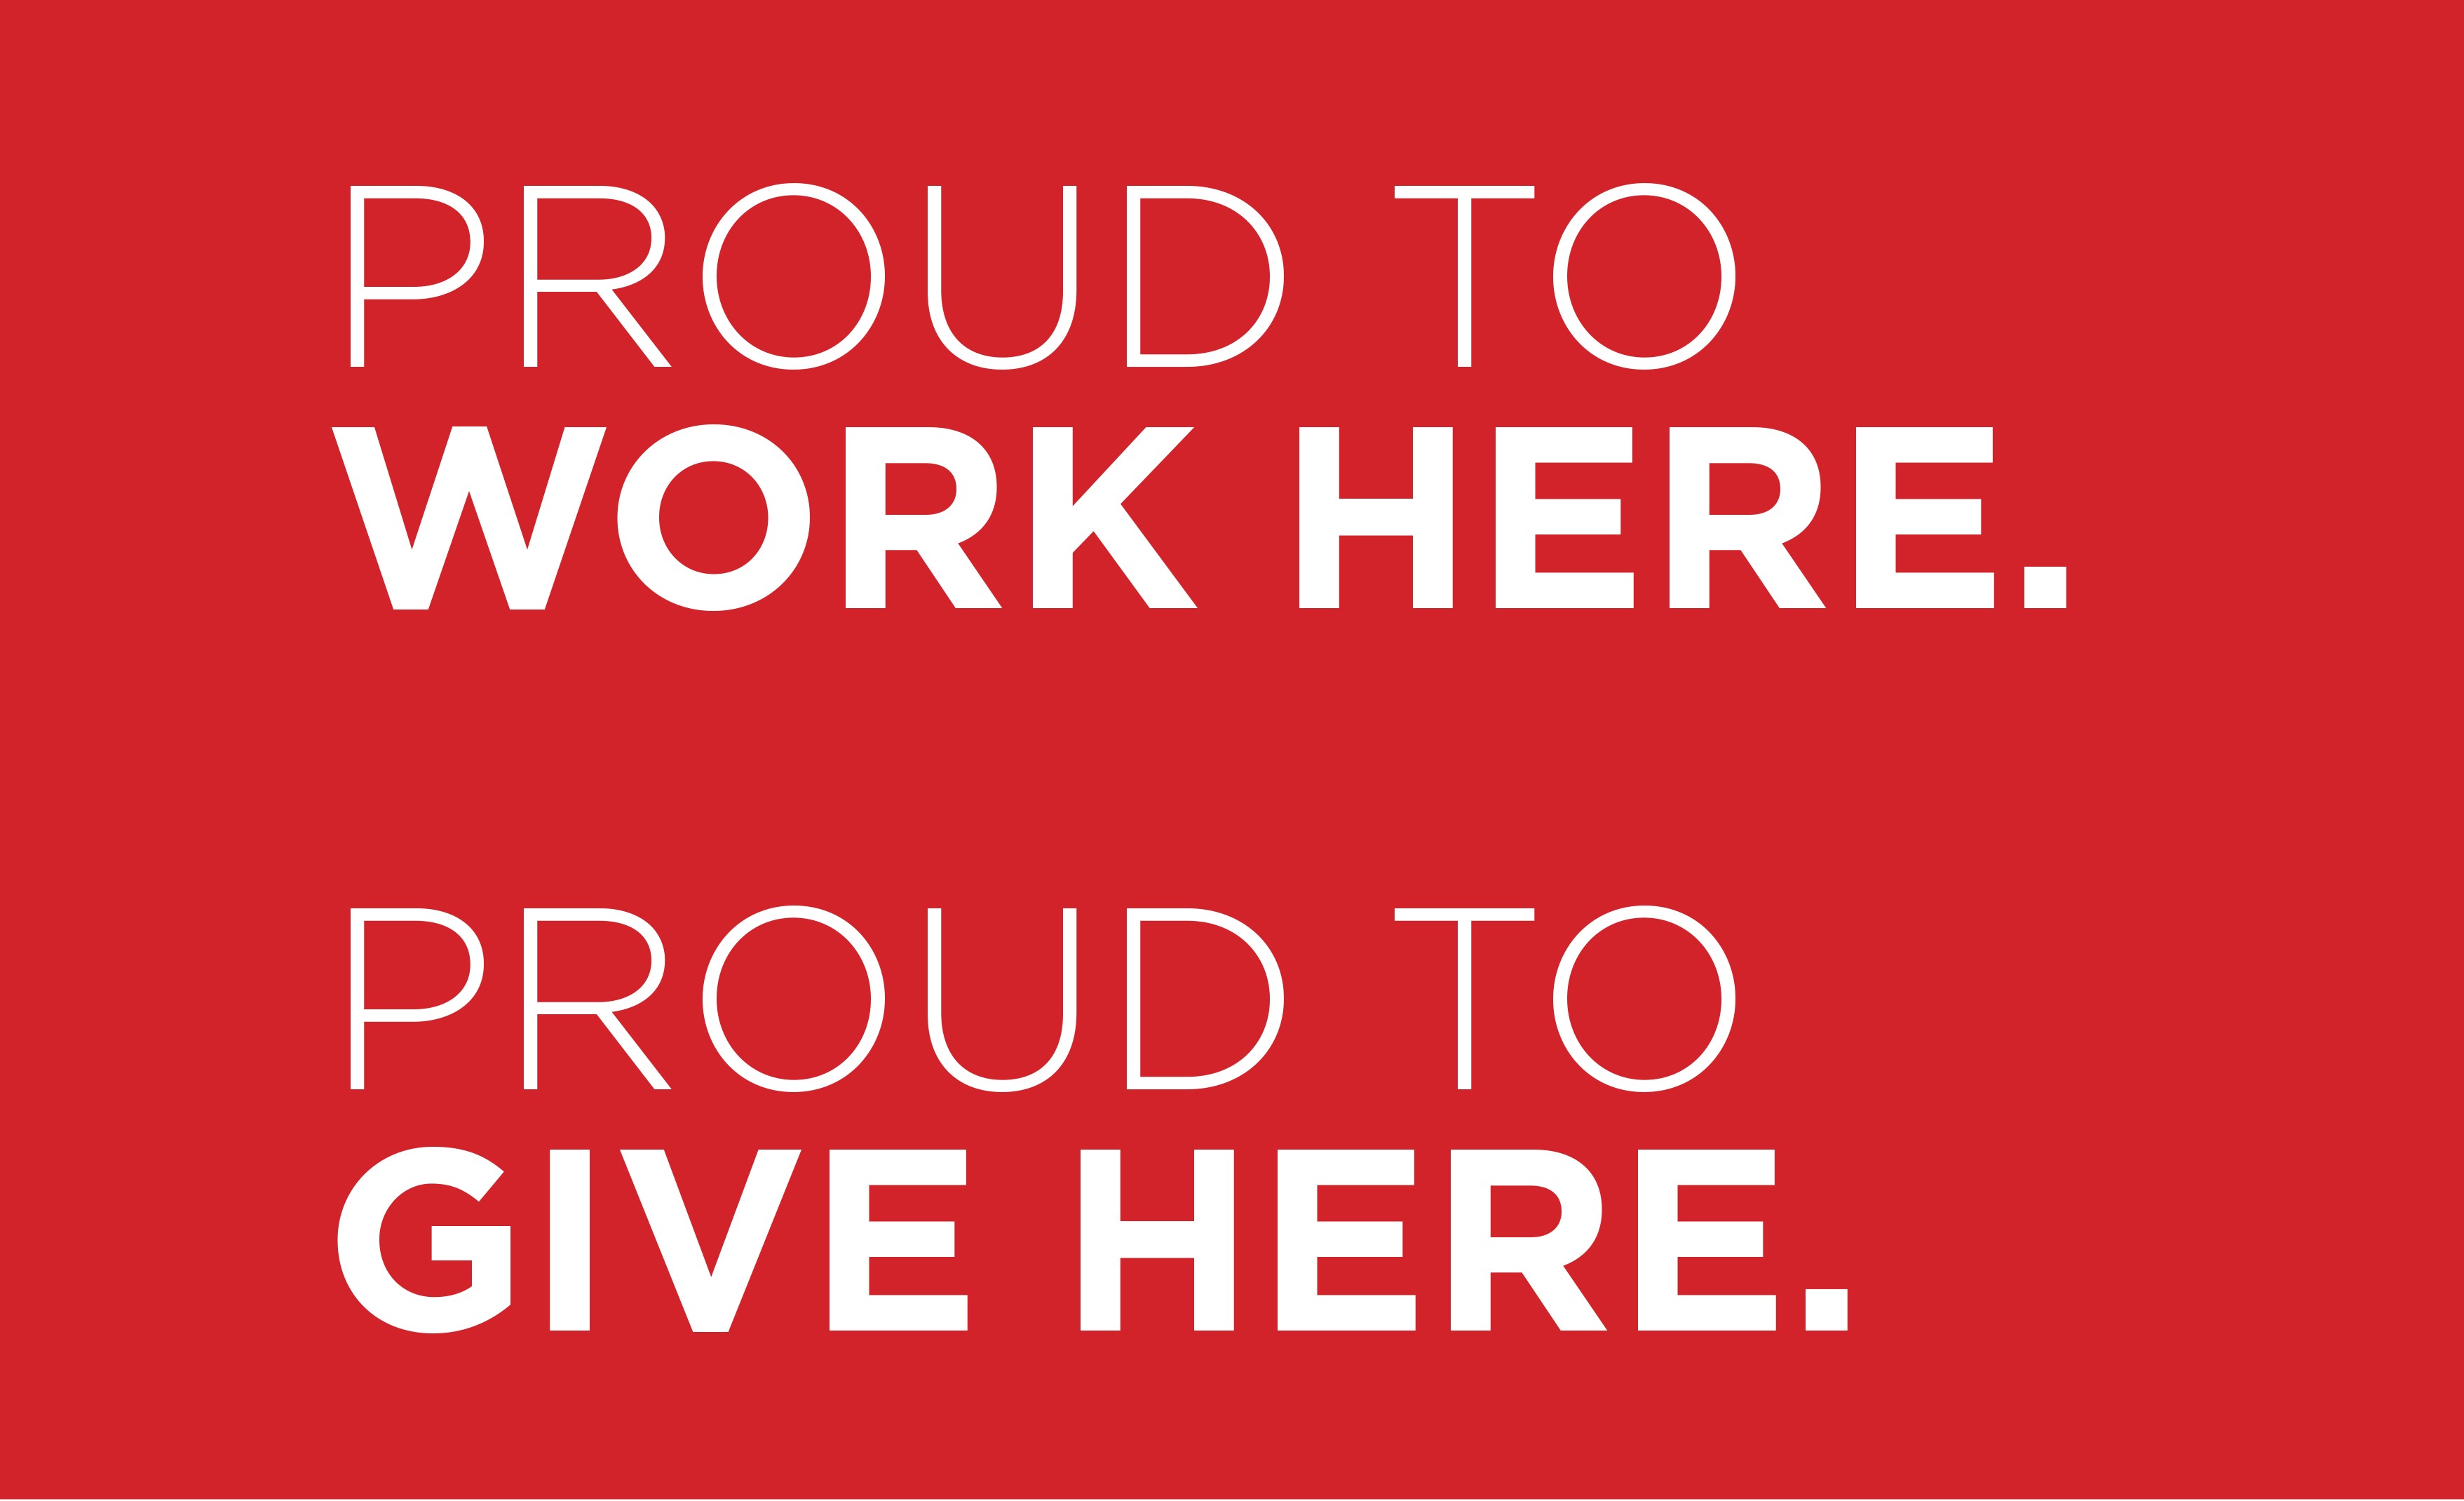 Proud to Work Here campaign logo